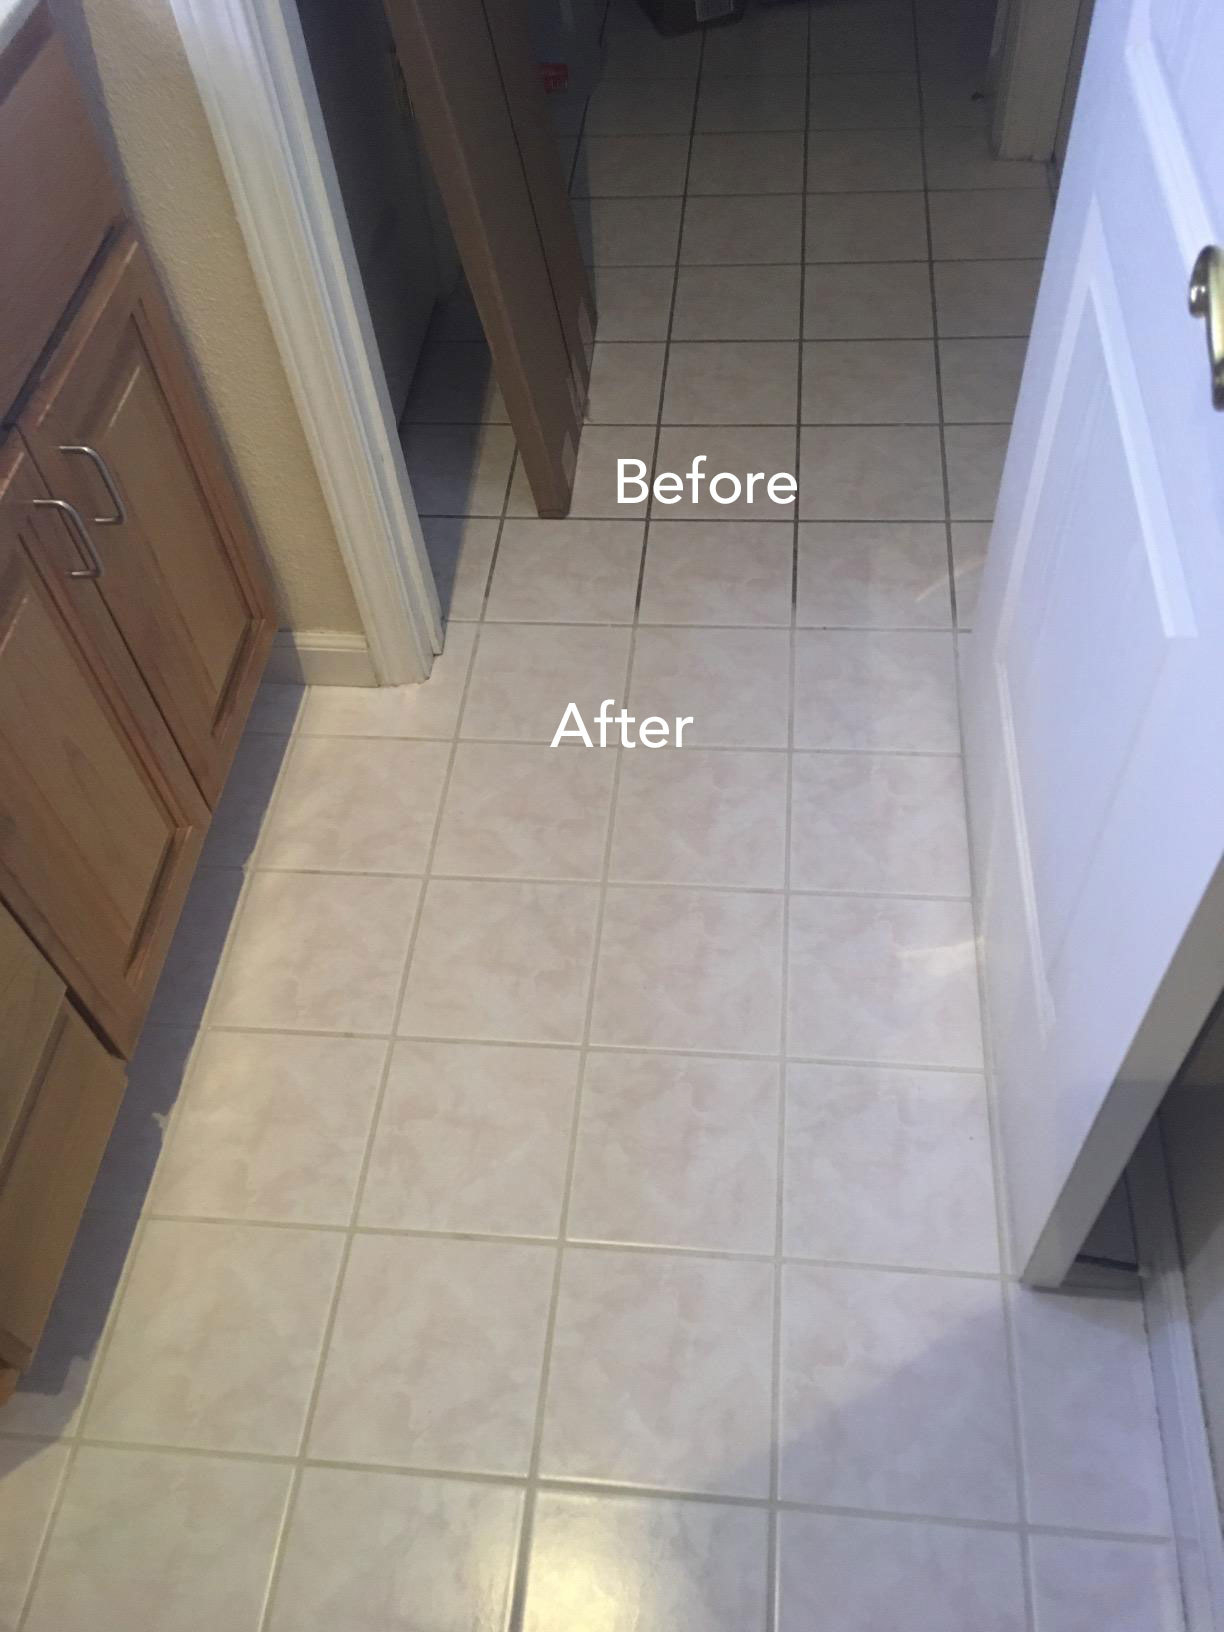 A review photo before and after of a tile floor, with dark dirty grout before, and clean grout after